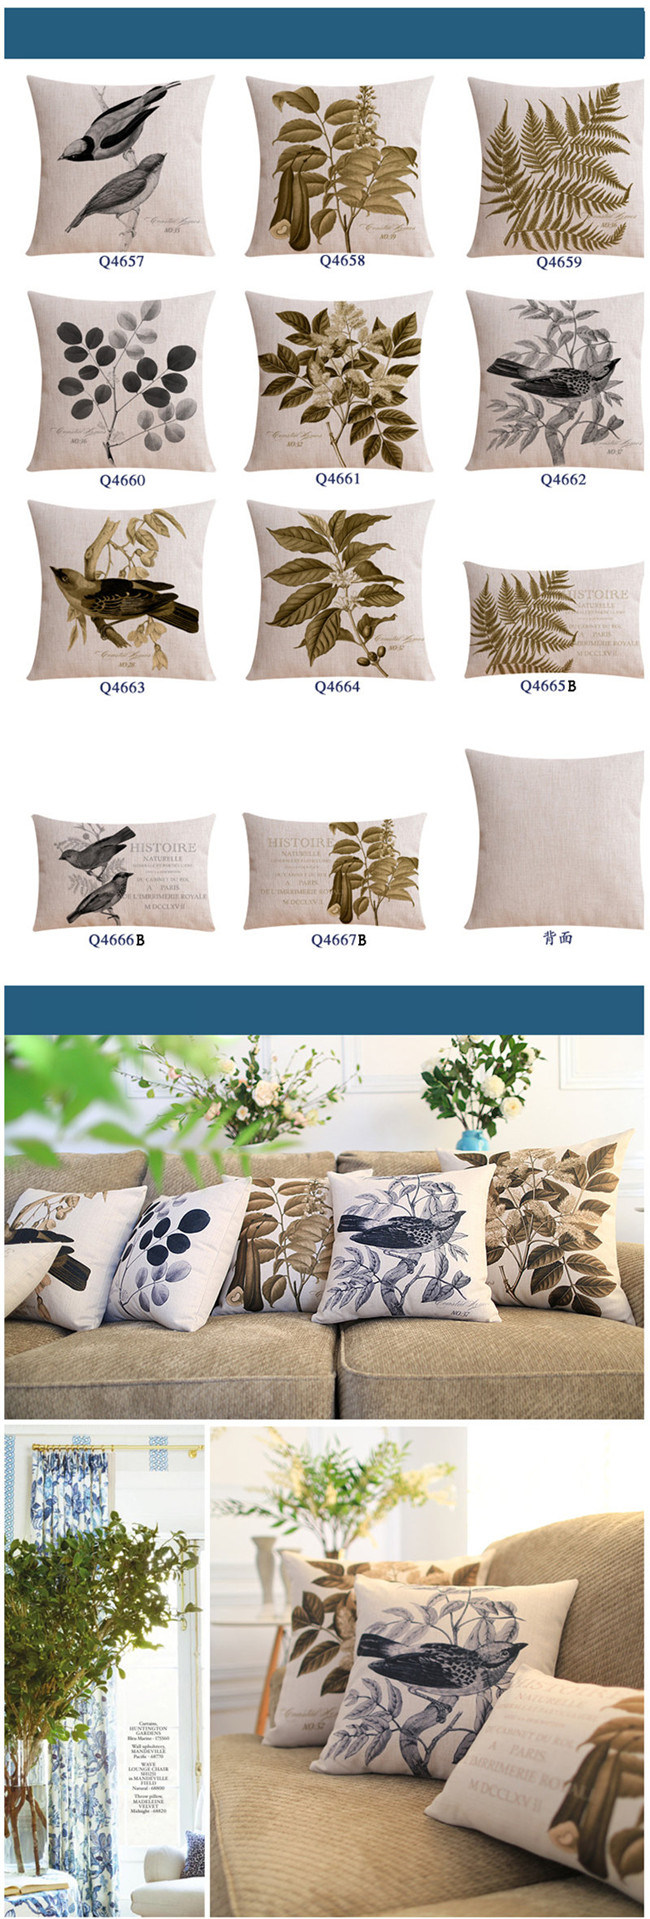 Yrf Soft Low Price Printed Cotton Linen Pillows Couch Bed Pillow